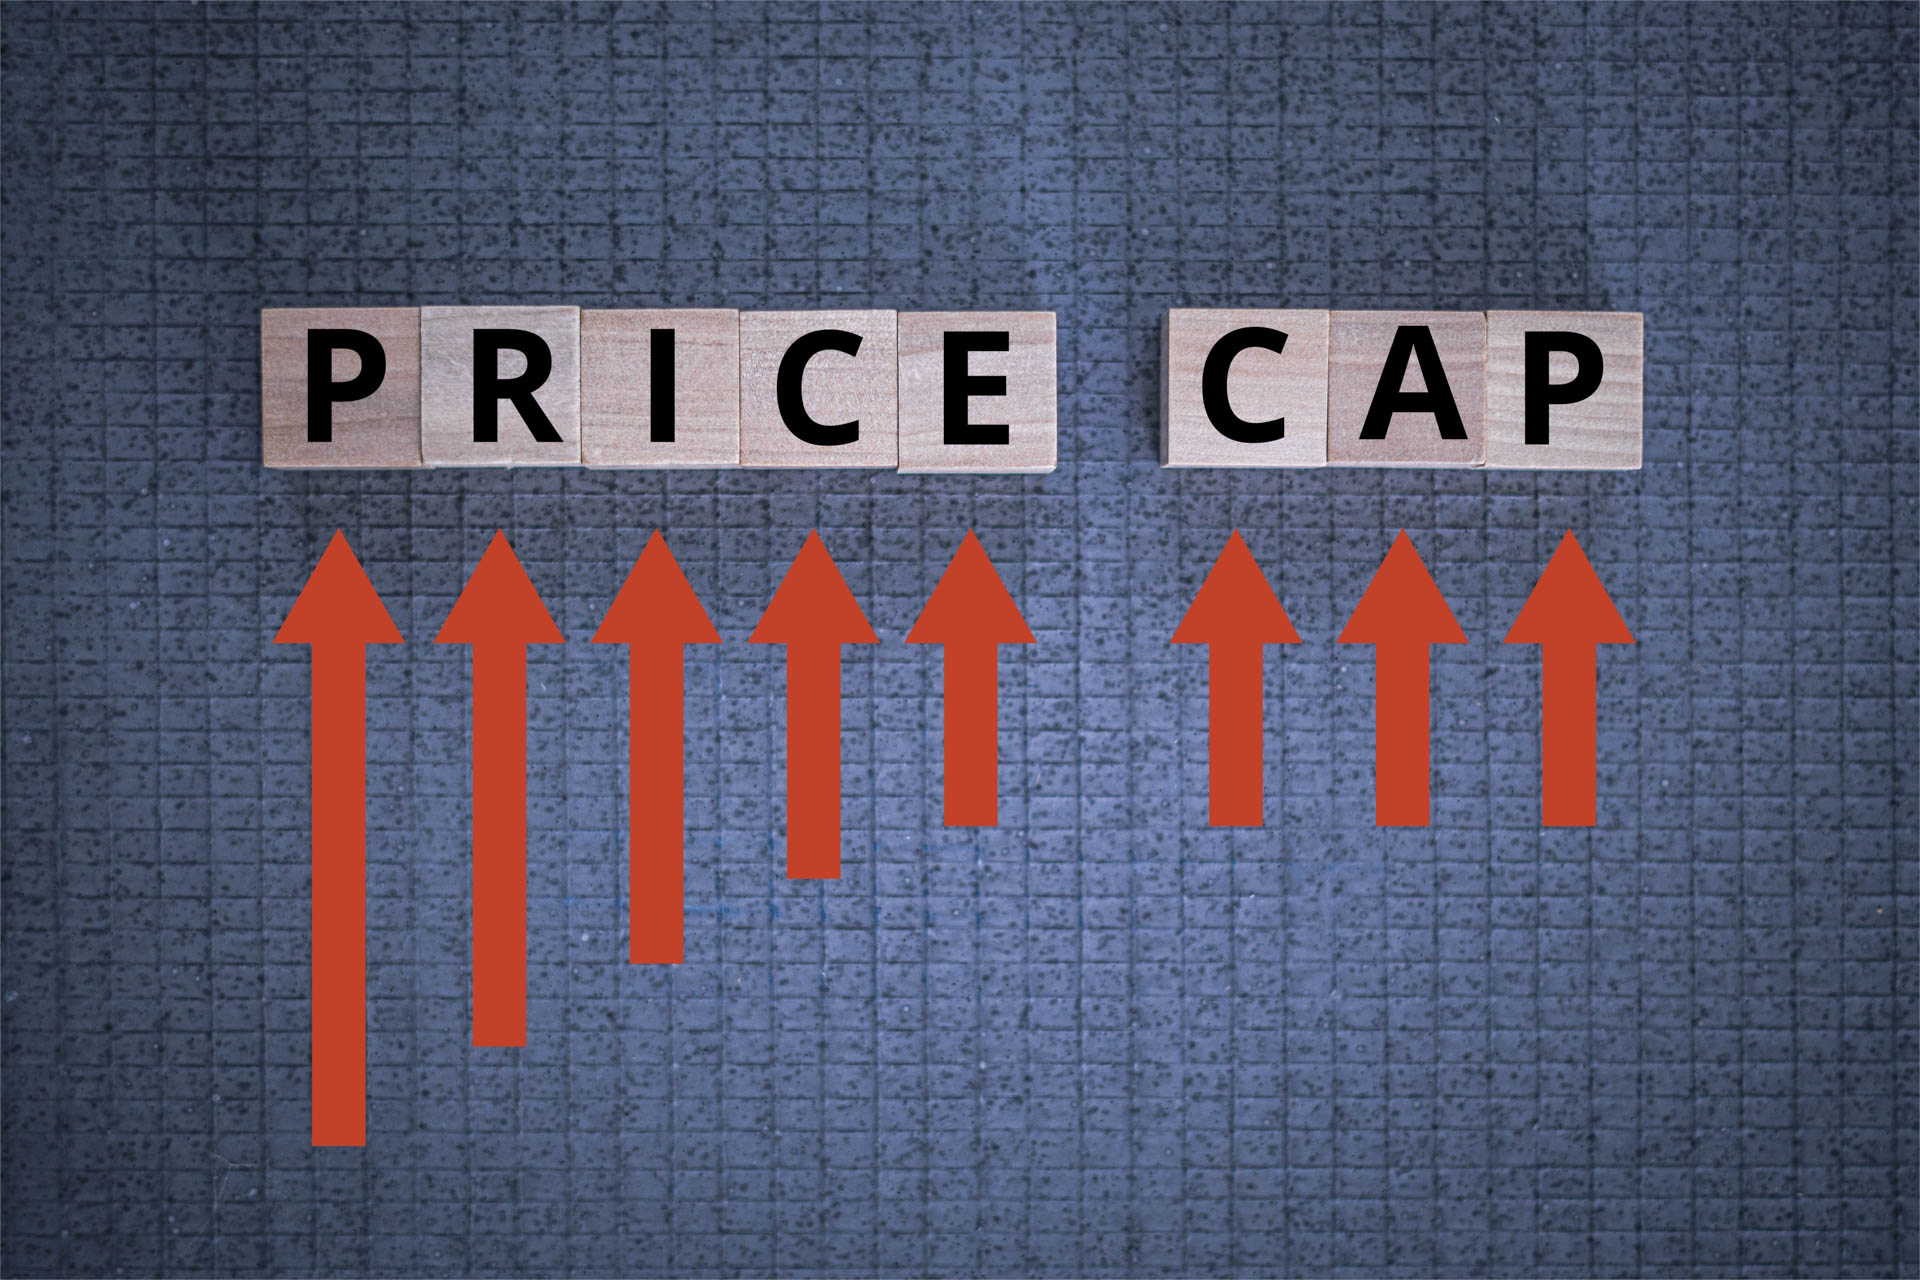 Price Cap on dark background with red arrows pointing upwards